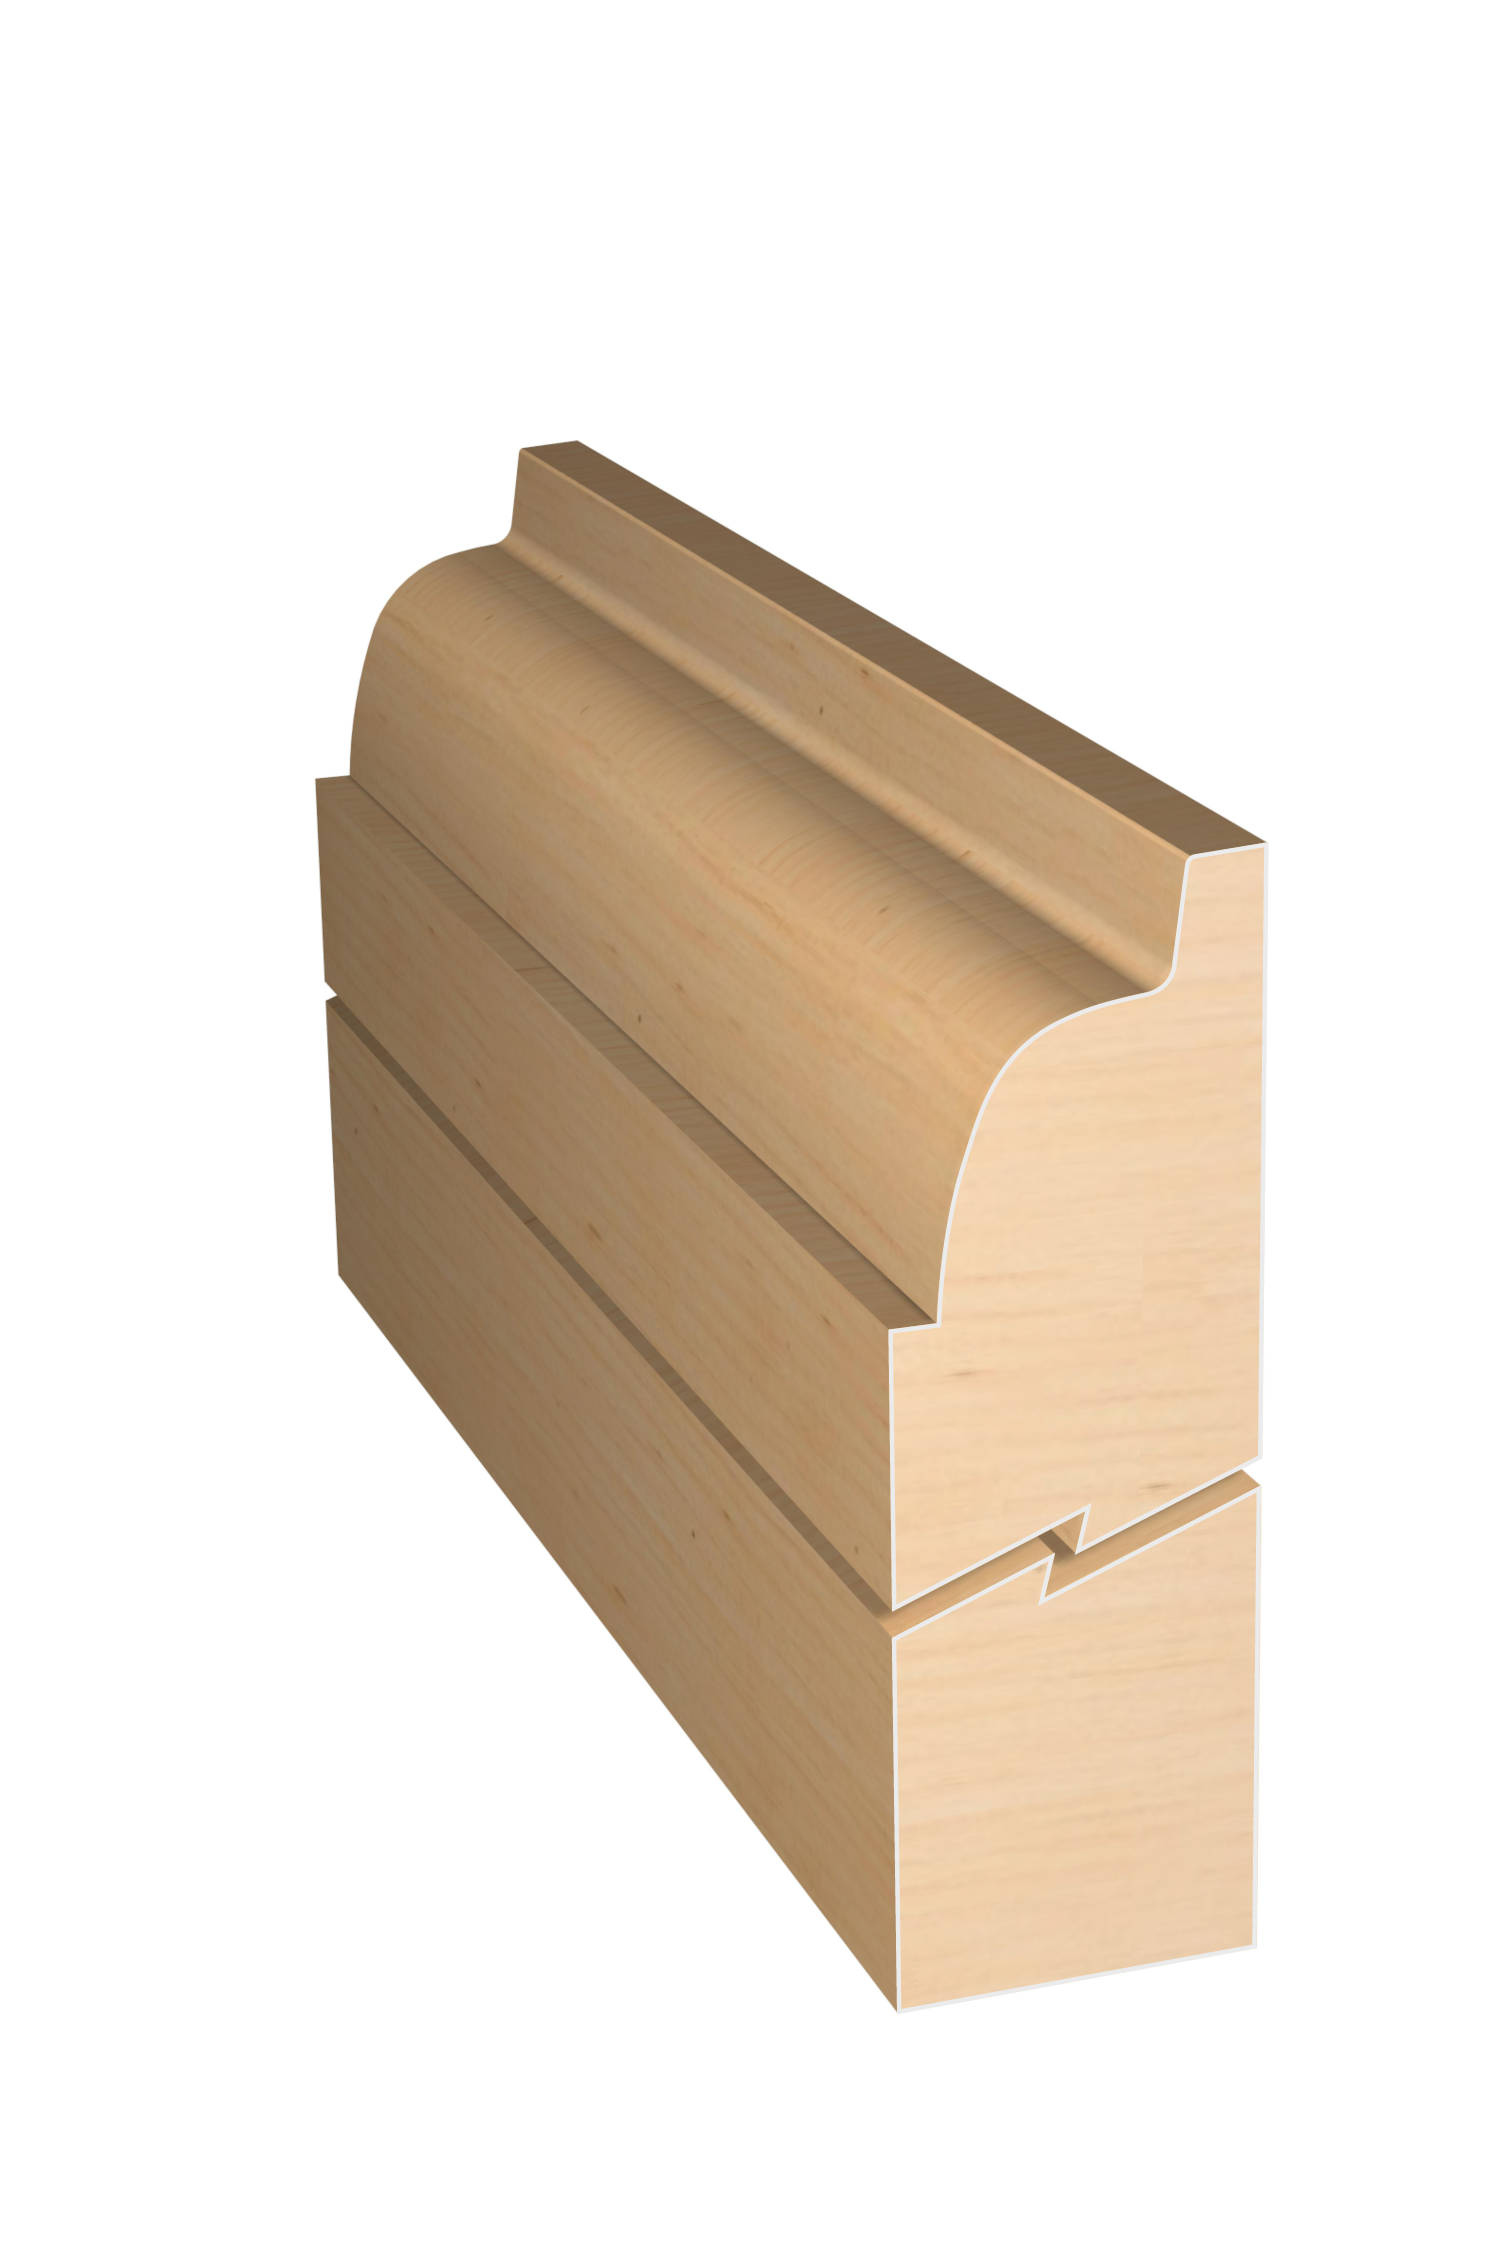 Three dimensional rendering of custom edge profile wood molding SKPL20 made by Public Lumber Company in Detroit.